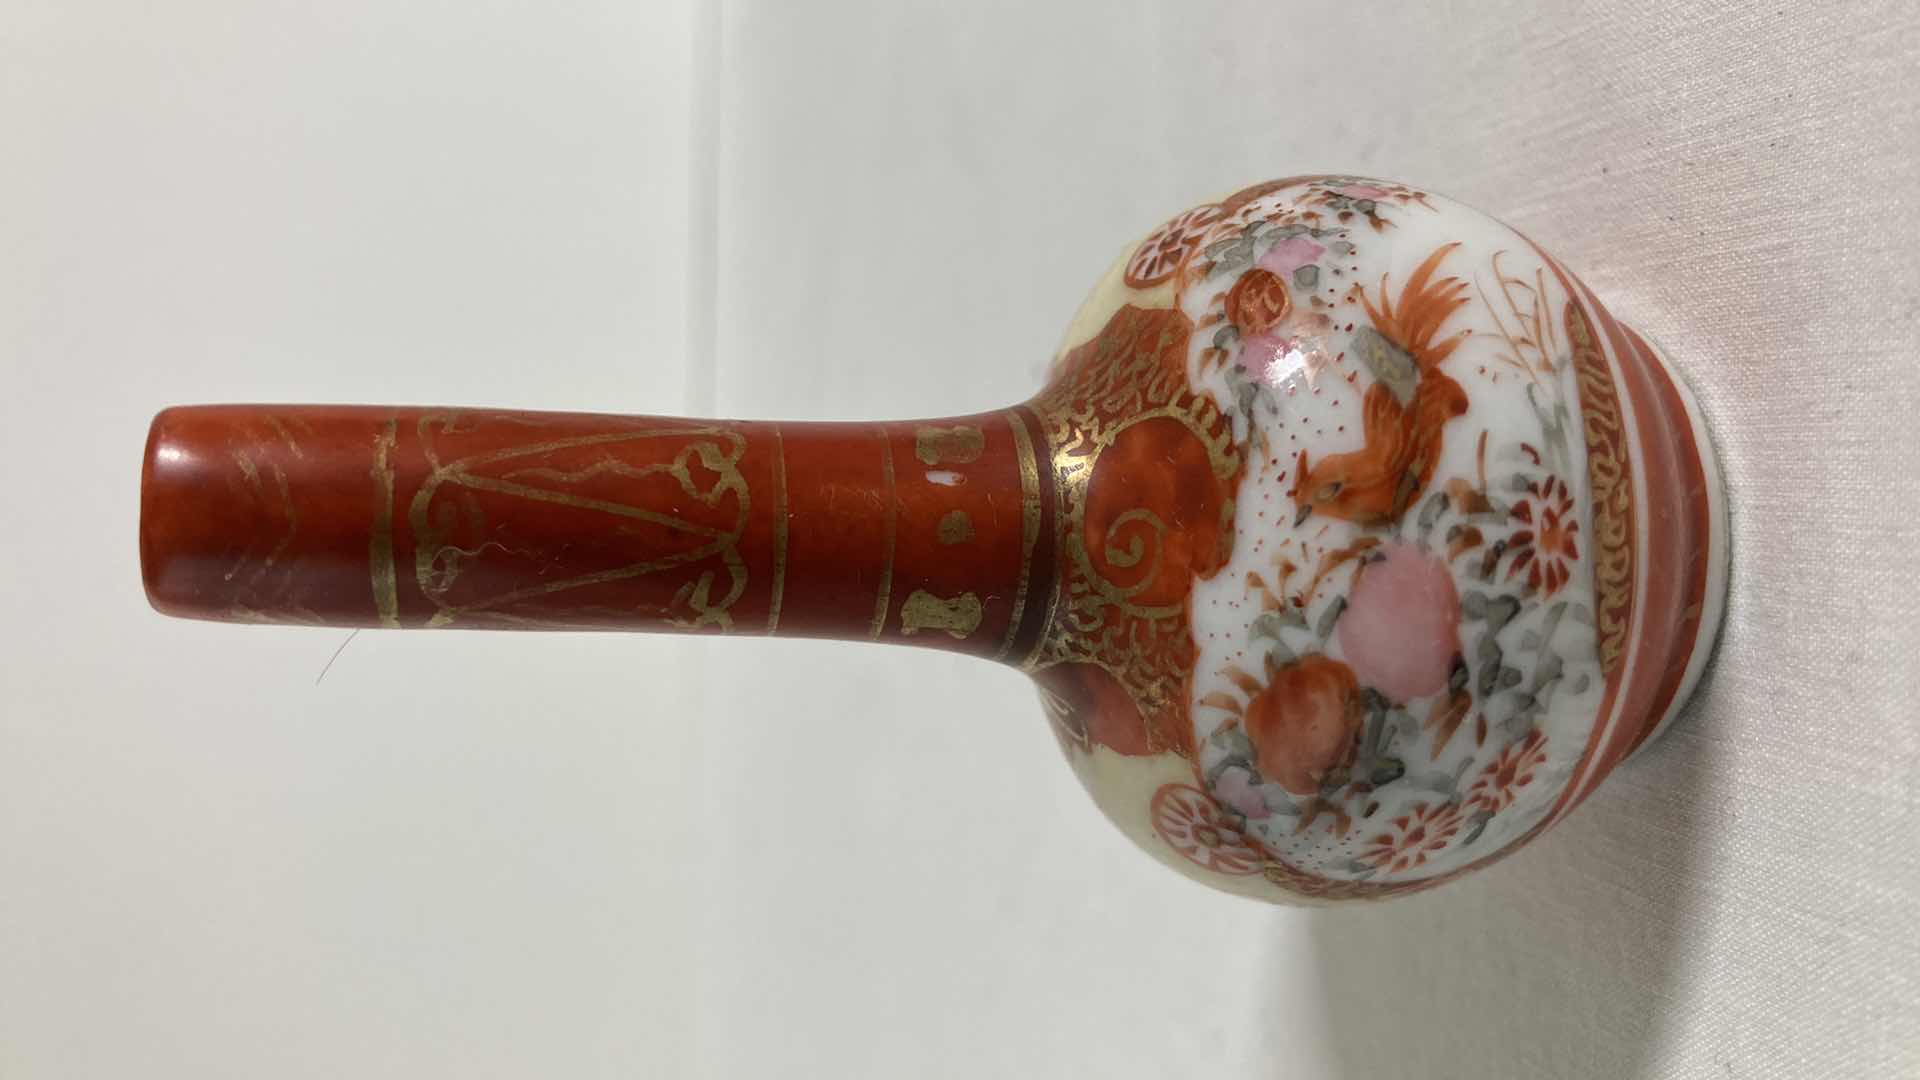 Photo 1 of EARLY CENTURY JAPANESE MINIATURE HAND PAINTED PORCELAIN VASE SIGNED BY ARTIST 1.75” X 3.5”